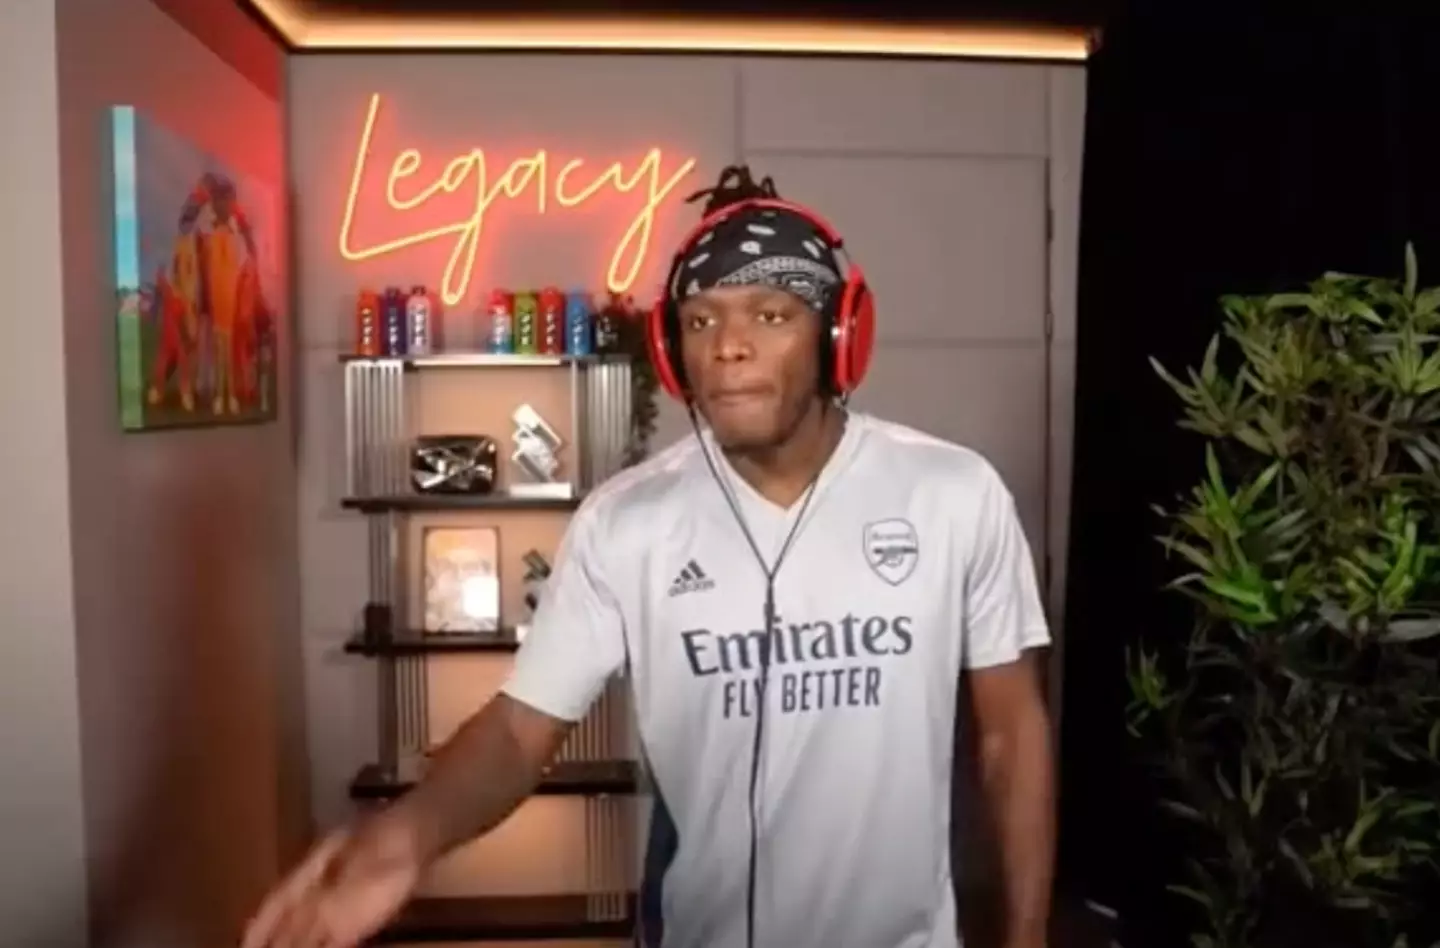 KSI was not impressed with the prices.